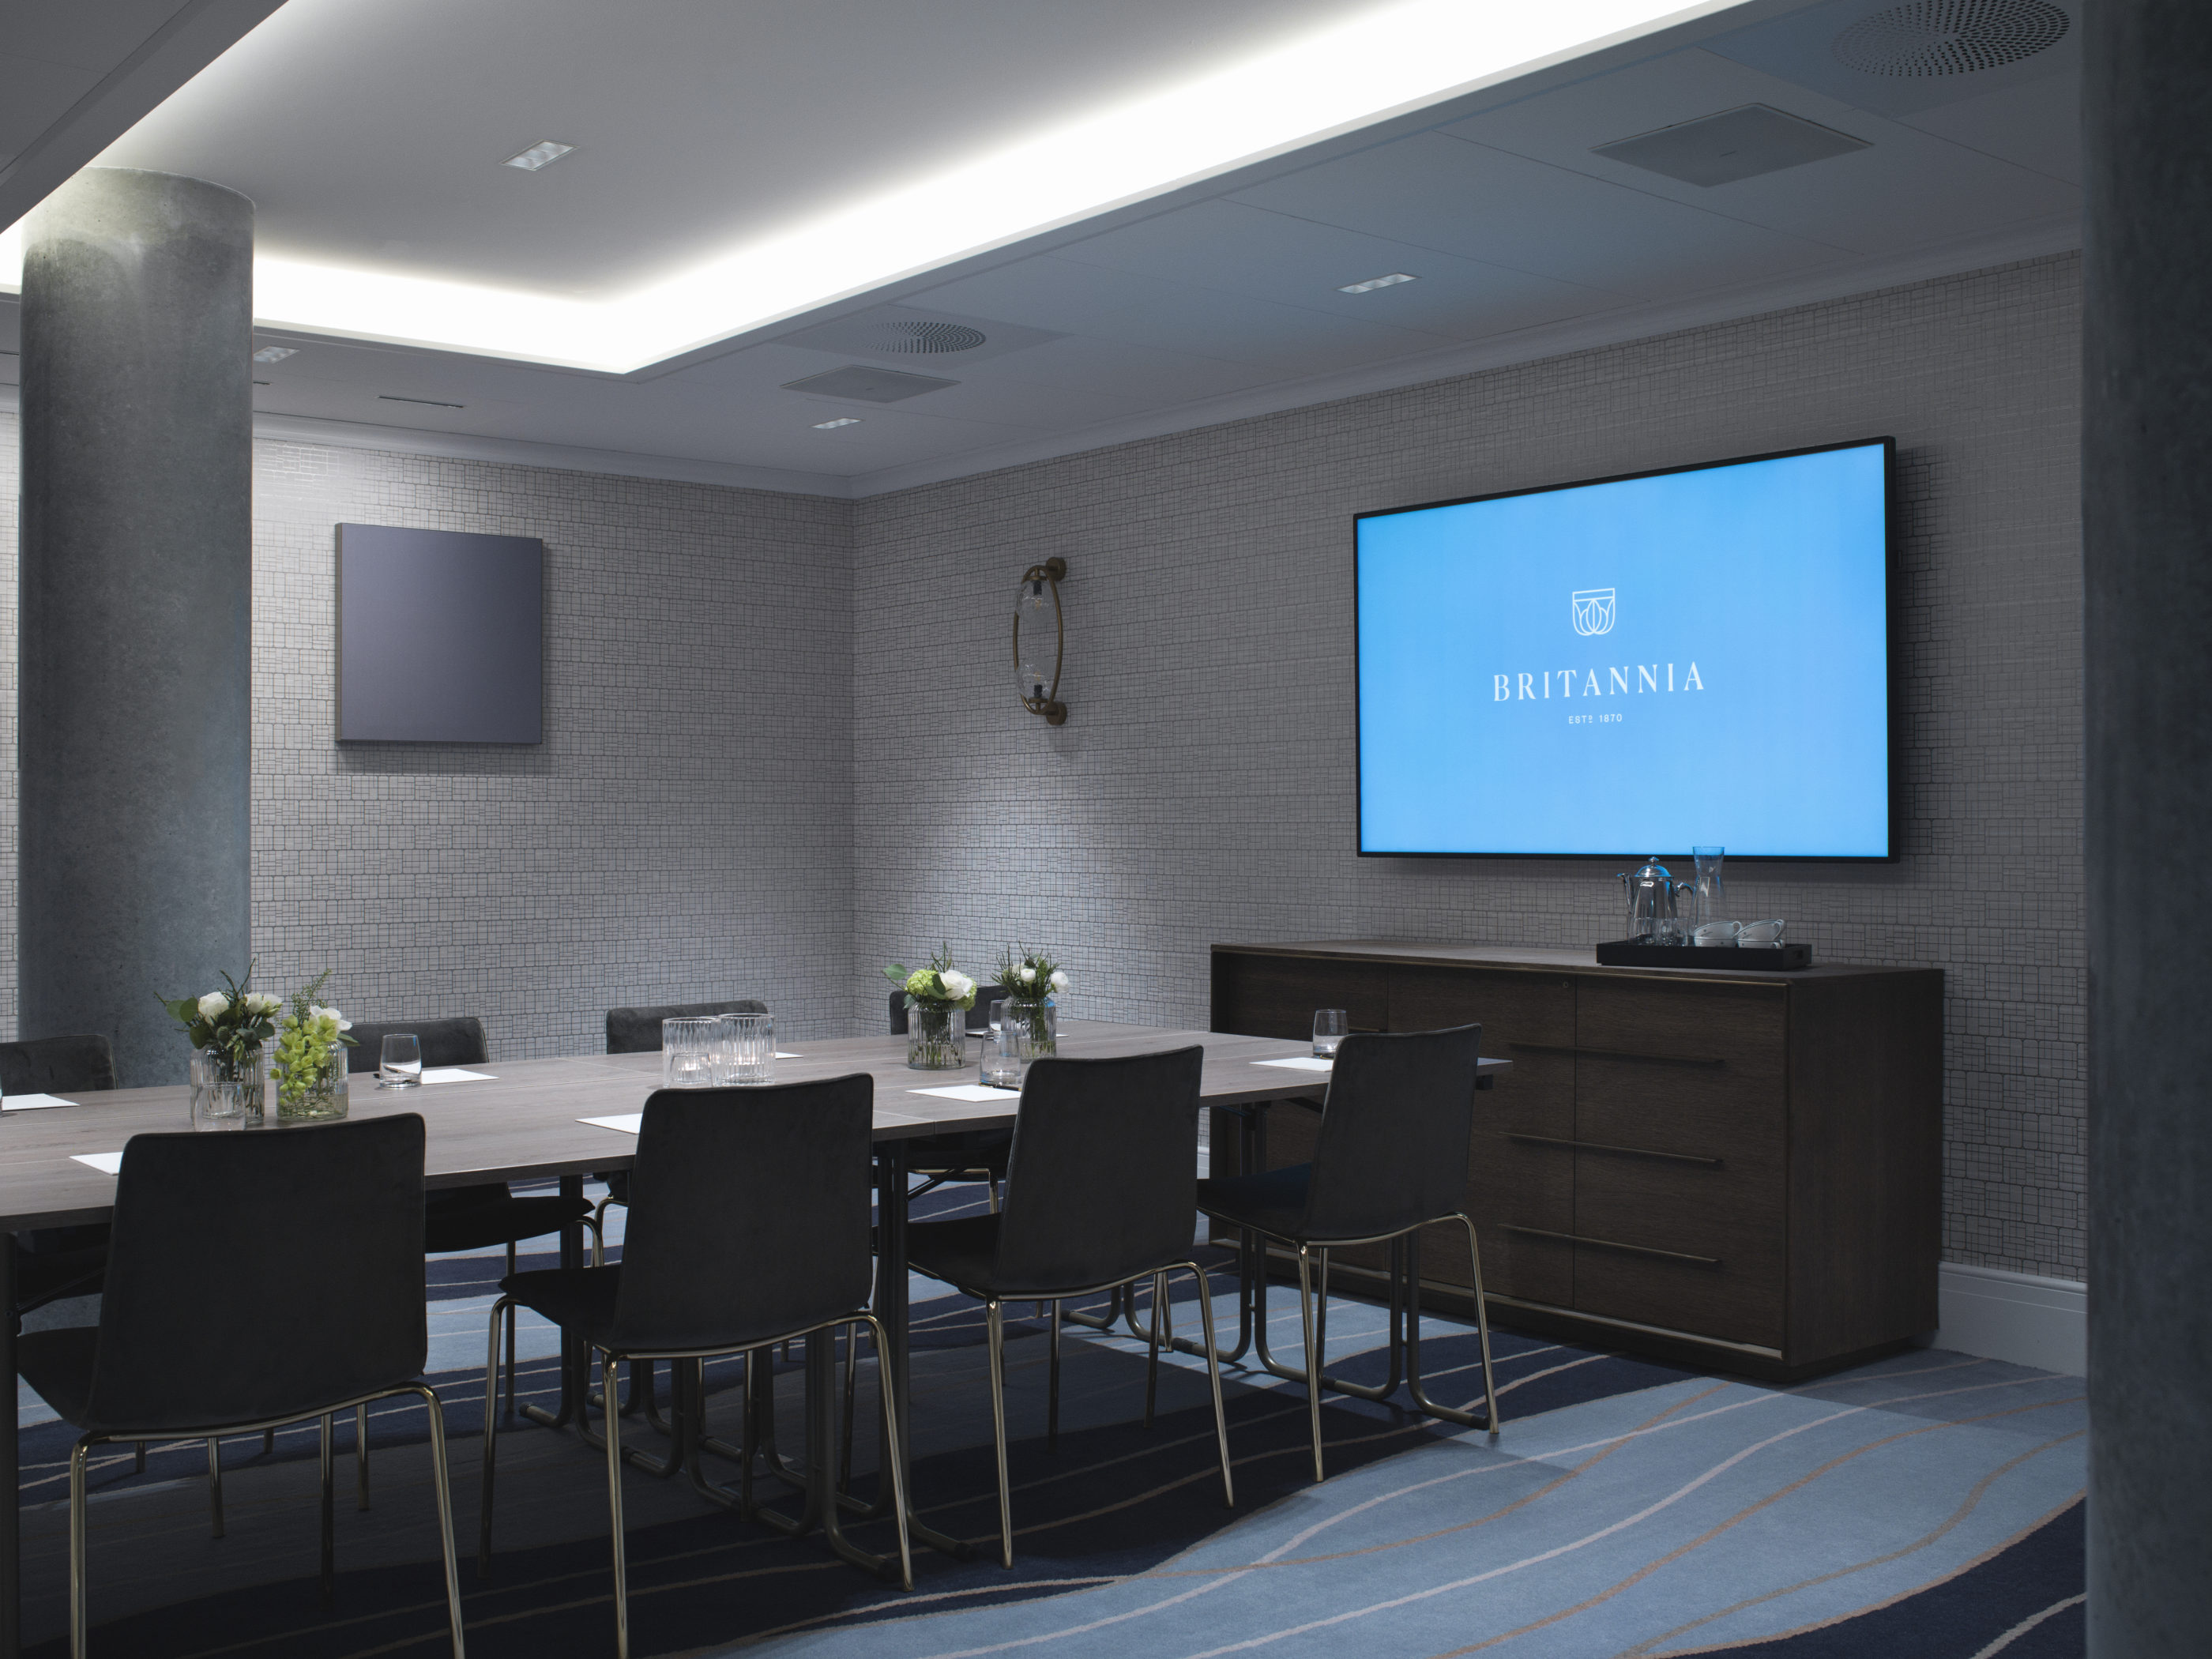 Ellisiv small meeting room table seating towards the big screen